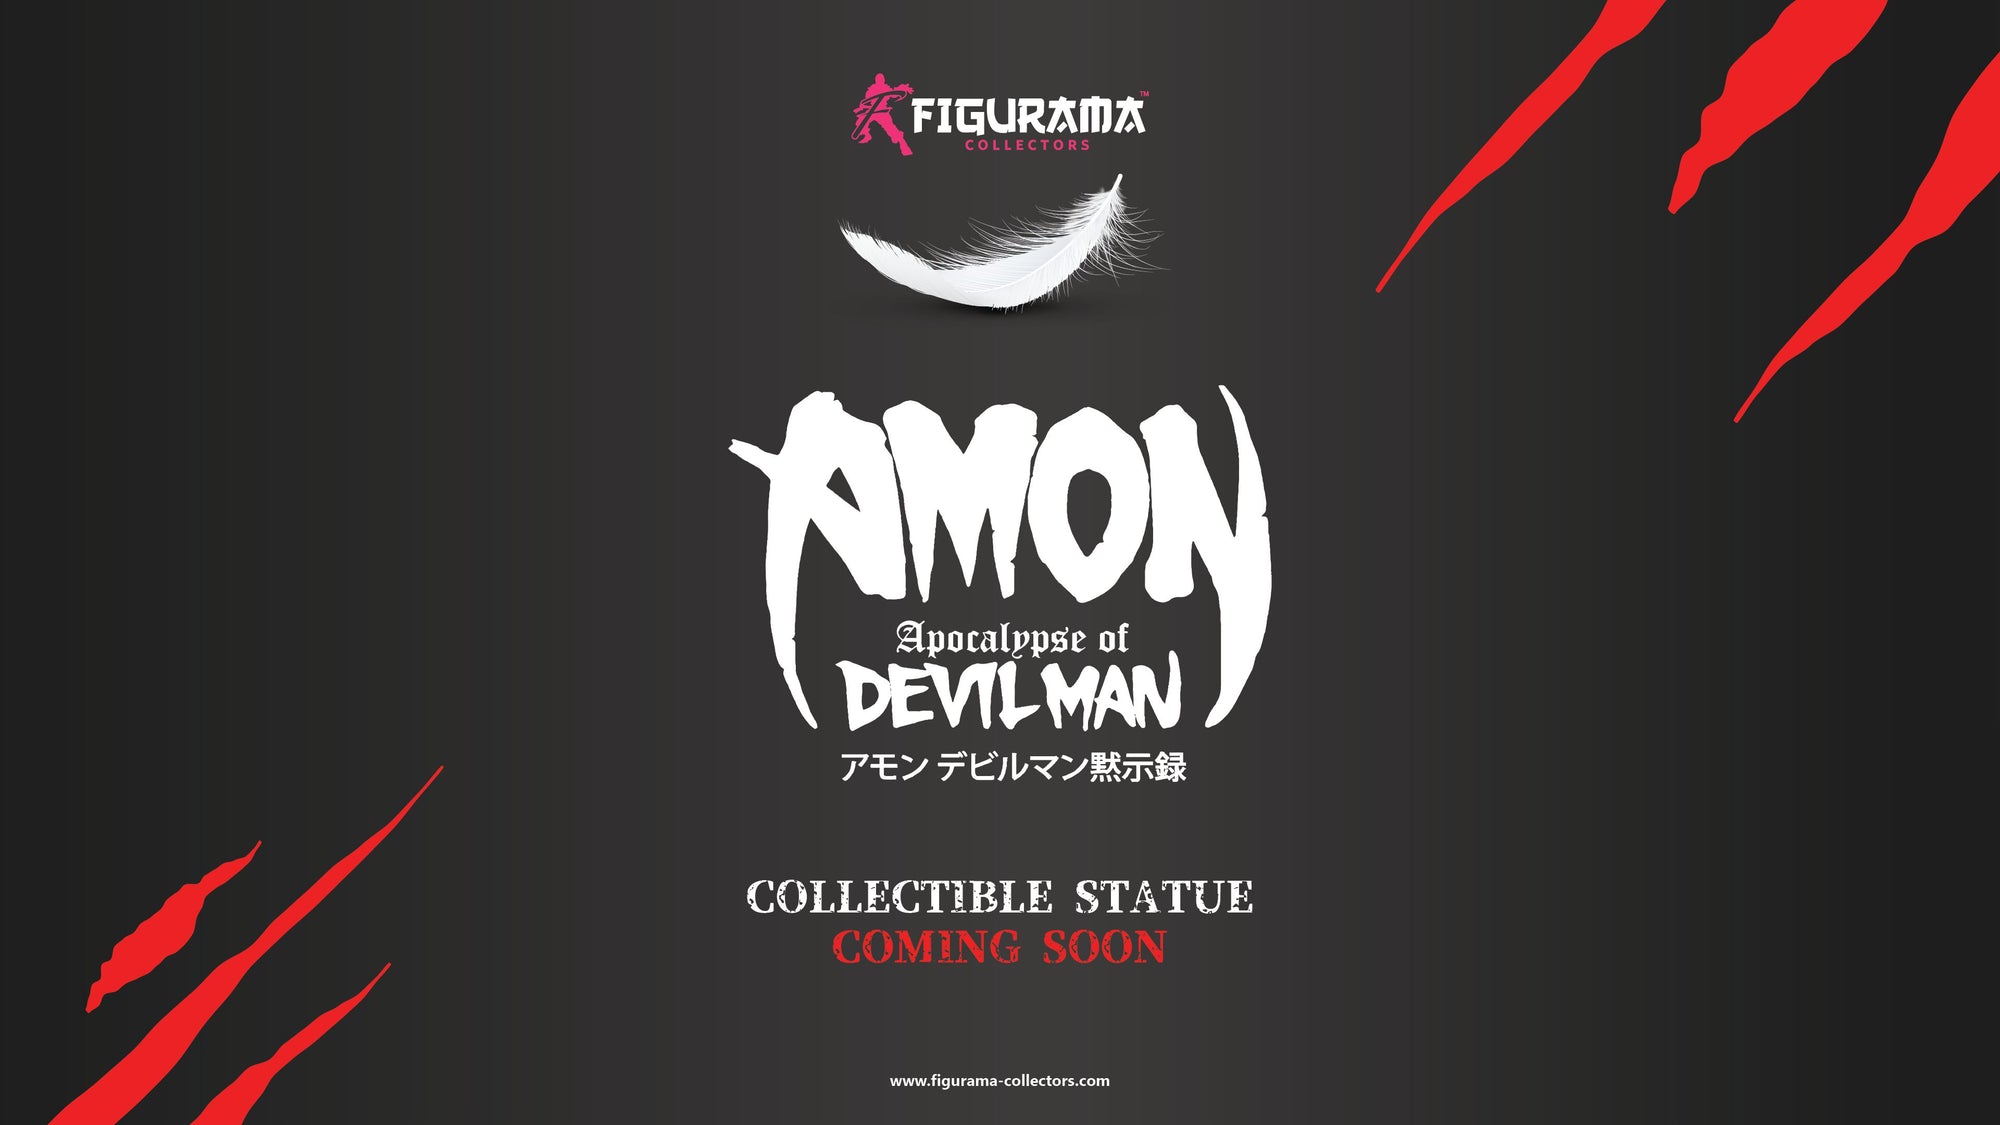 New Statue Announced Inspired by Devilman!